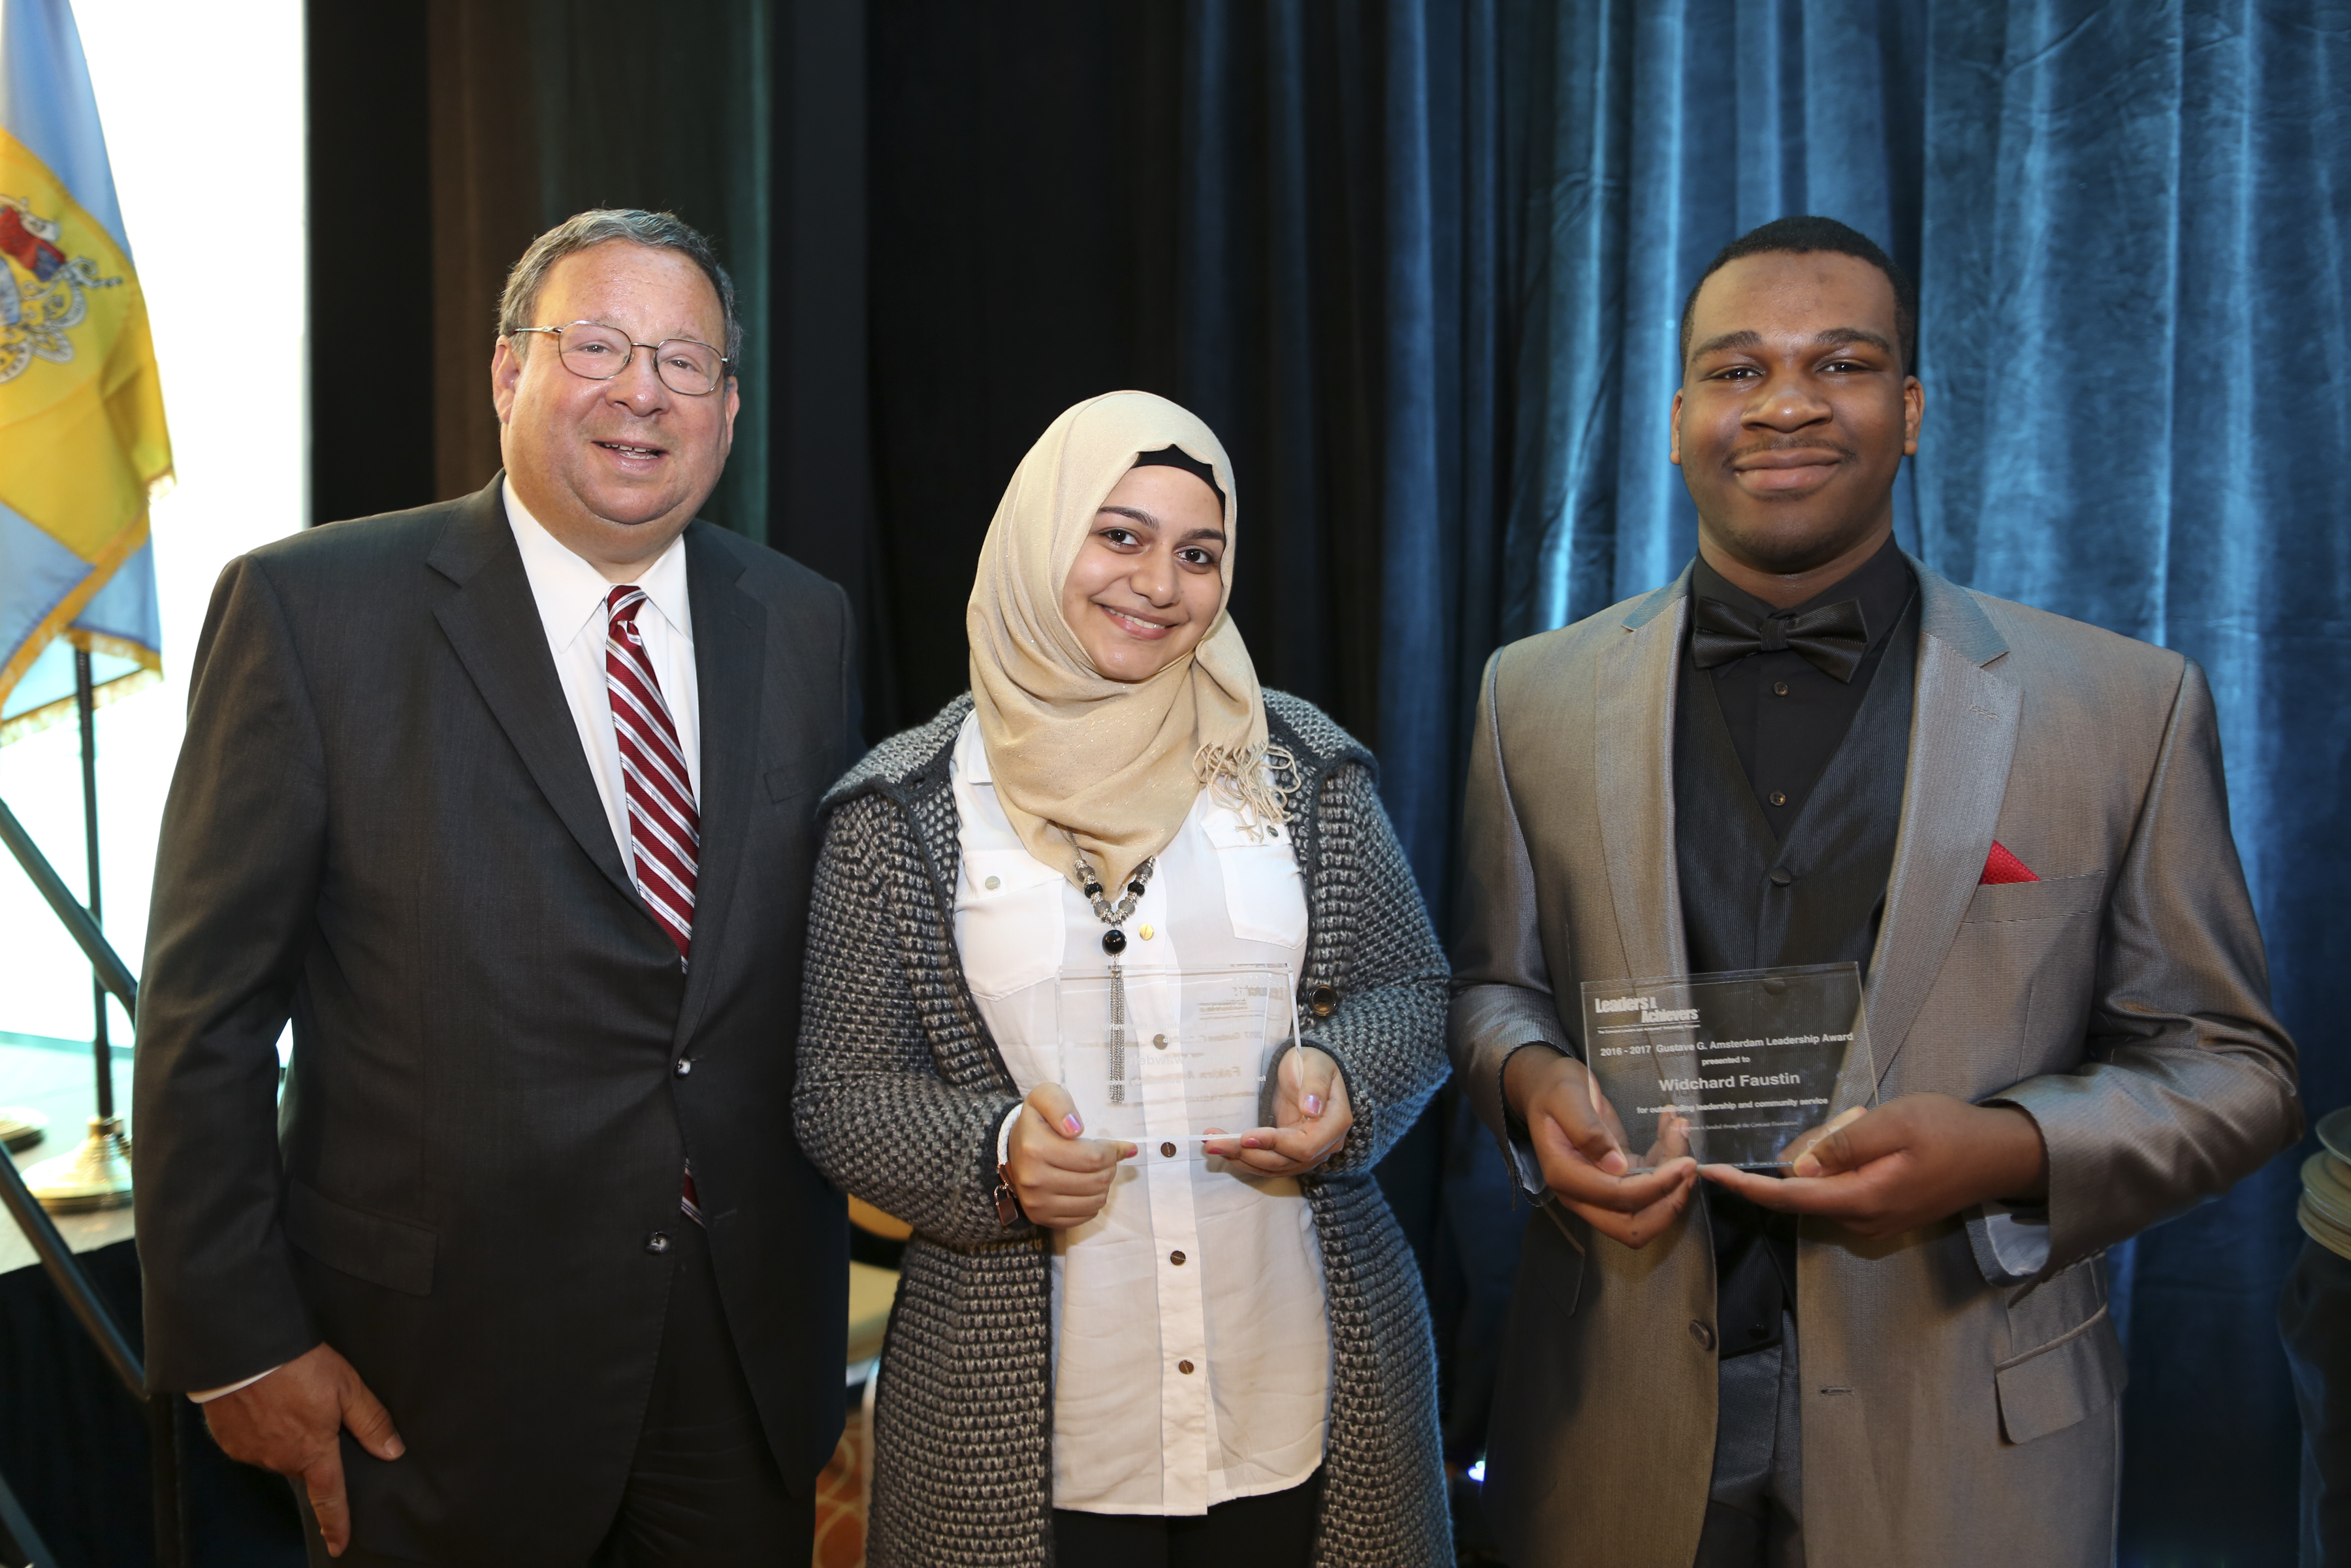 David L. Cohen, Senior Executive Vice President & Chief Diversity Officer poses with the Gustave G. Amsterdam Leadership Award recipients Fakira Awawdeh and Widchard Faustin on Thursday Feb. 2, 2017, during the Chamber of Commerce for Greater Philadelphia's Annual Mayor's Luncheon in Philadelphia.  (Comcast Photo/ Joseph Kaczmarek)